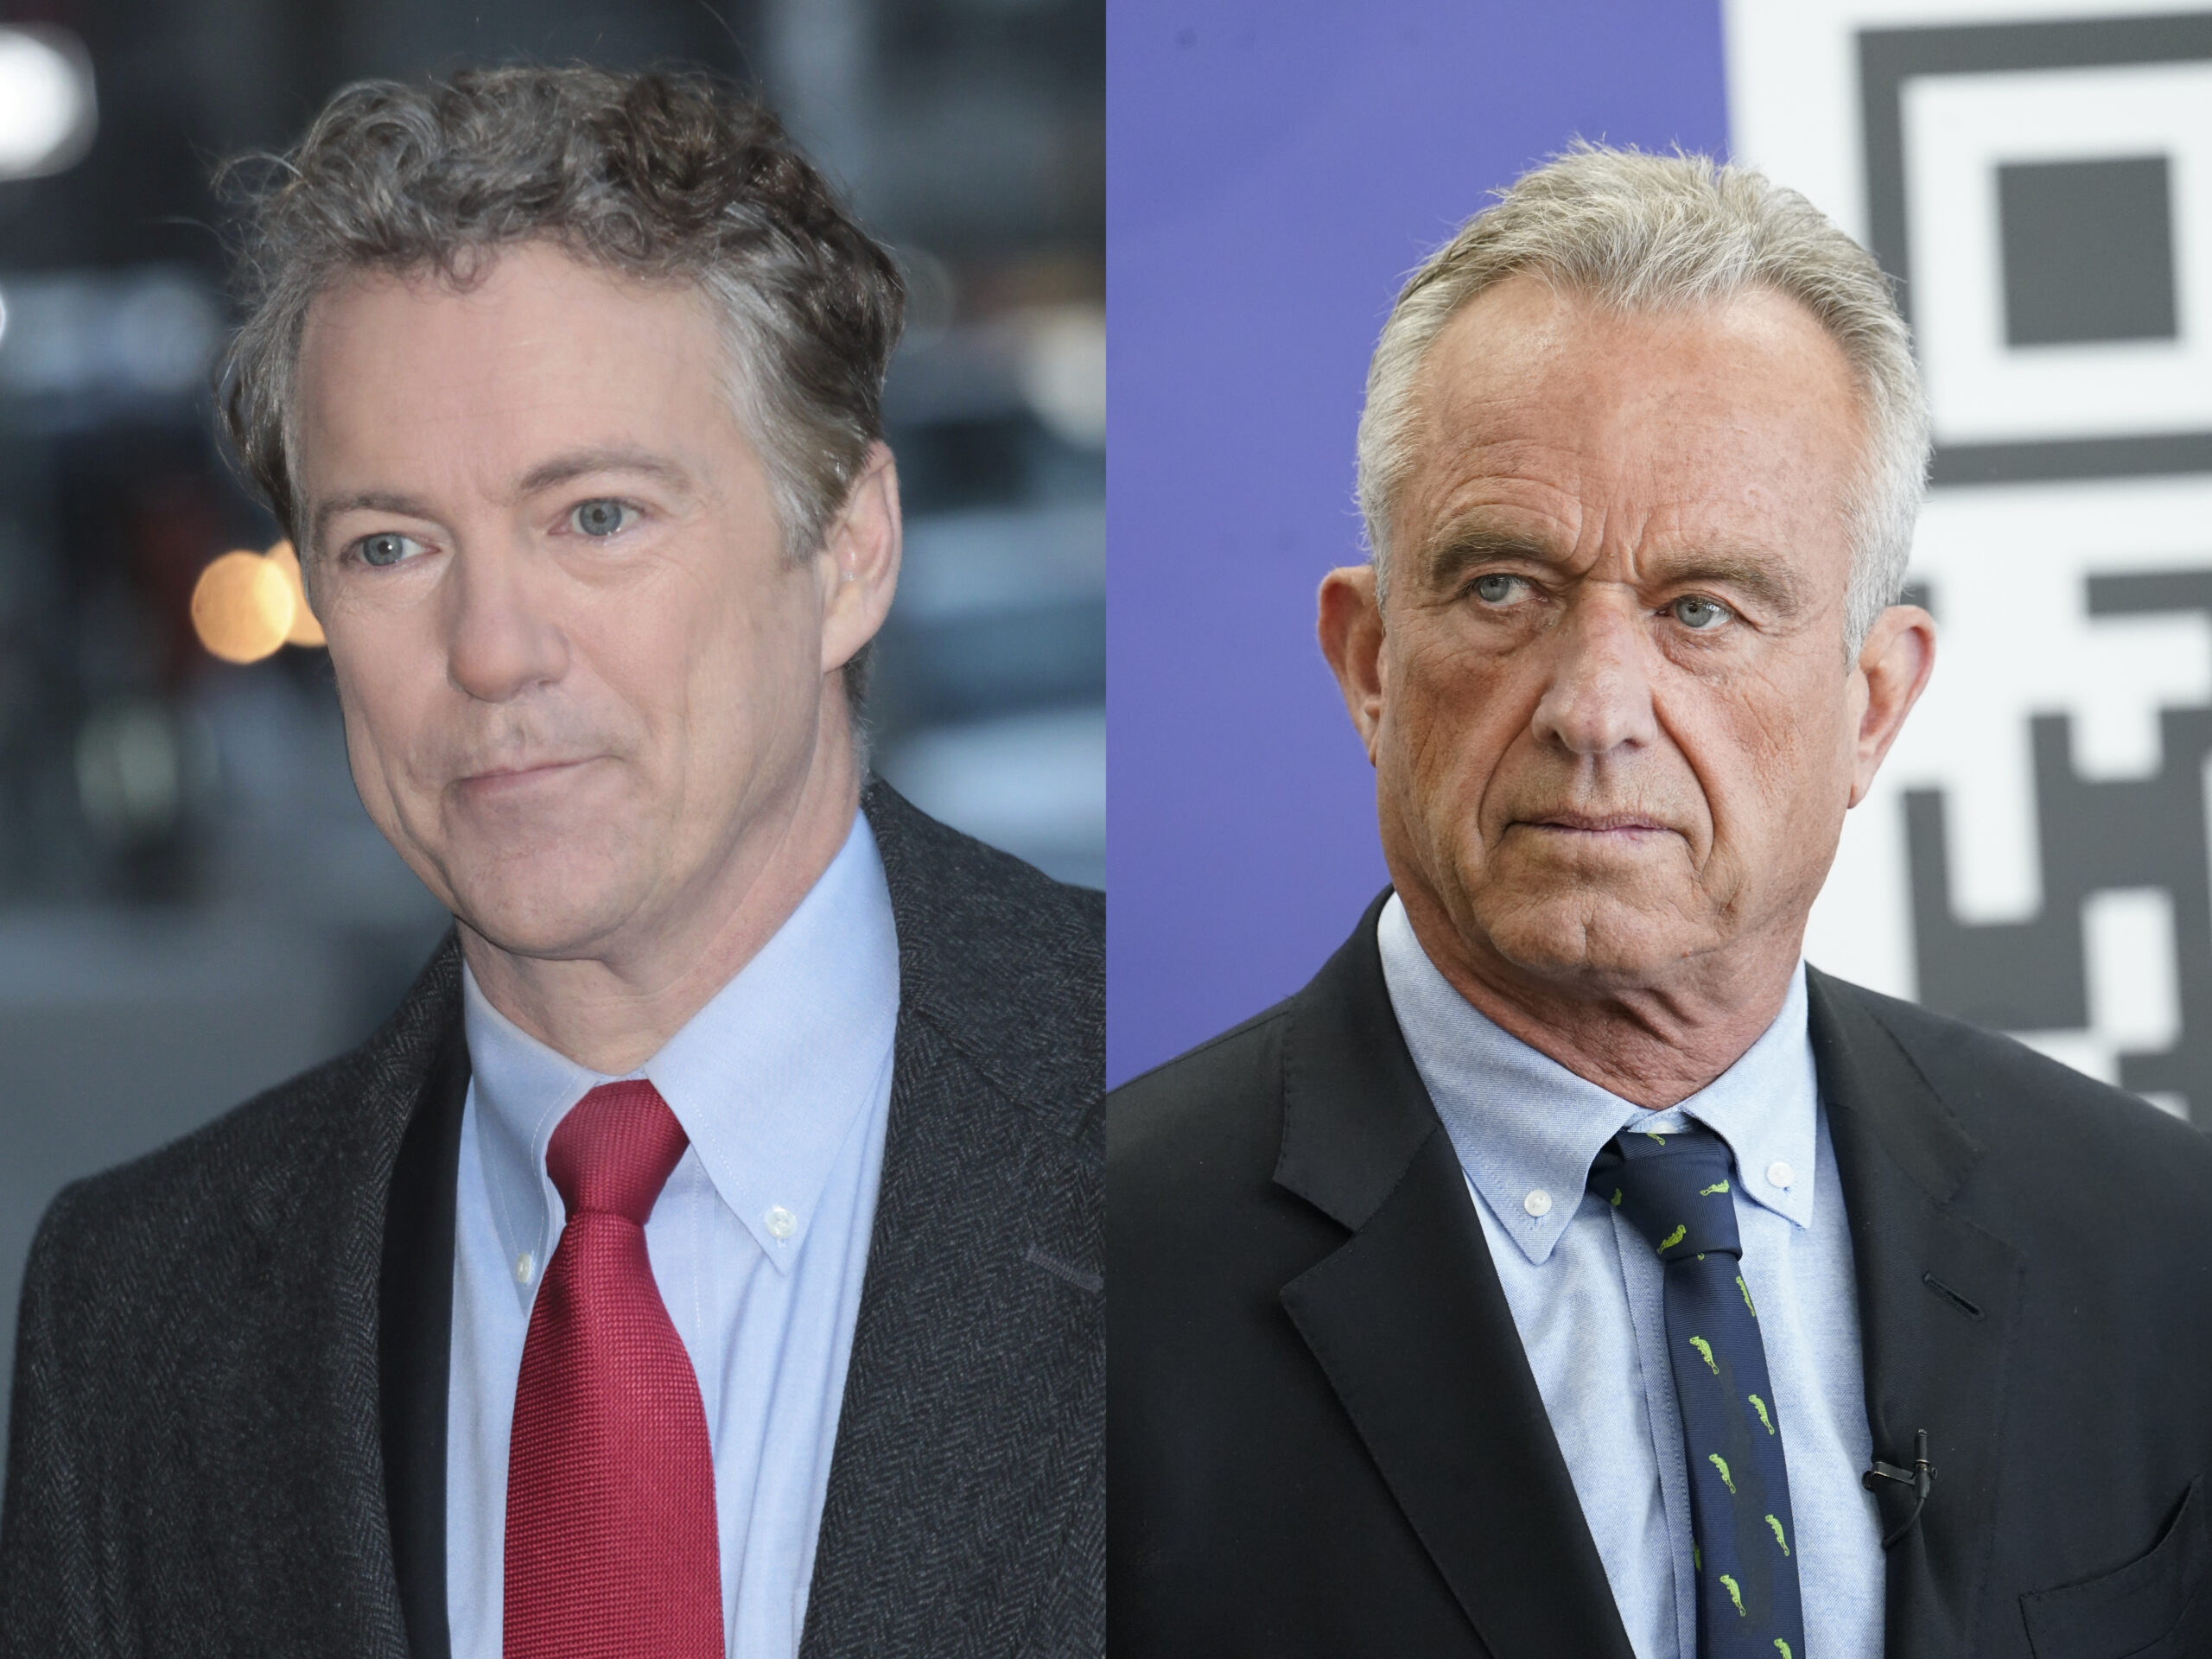 RFK Jr. Endorses Rand Paul To Replace Mitch McConnell as Senate Republican Leader: ‘He’s Shown Great Judgment’ (mediaite.com)